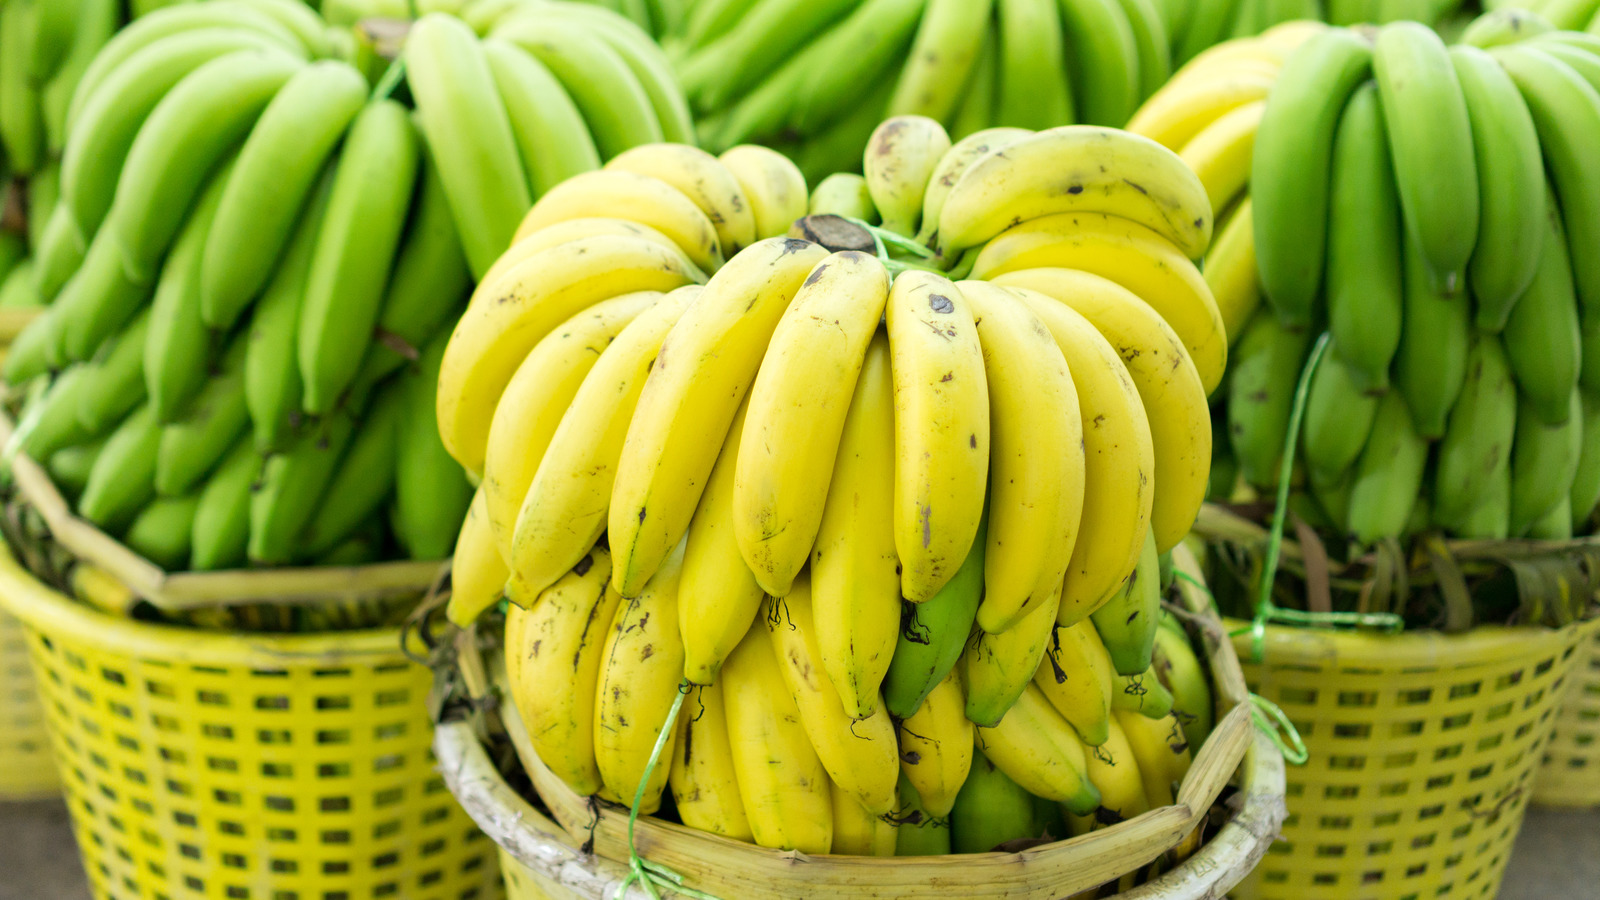 There Might Soon Be A Shortage Of Bananas, And It Has Nothing To Do